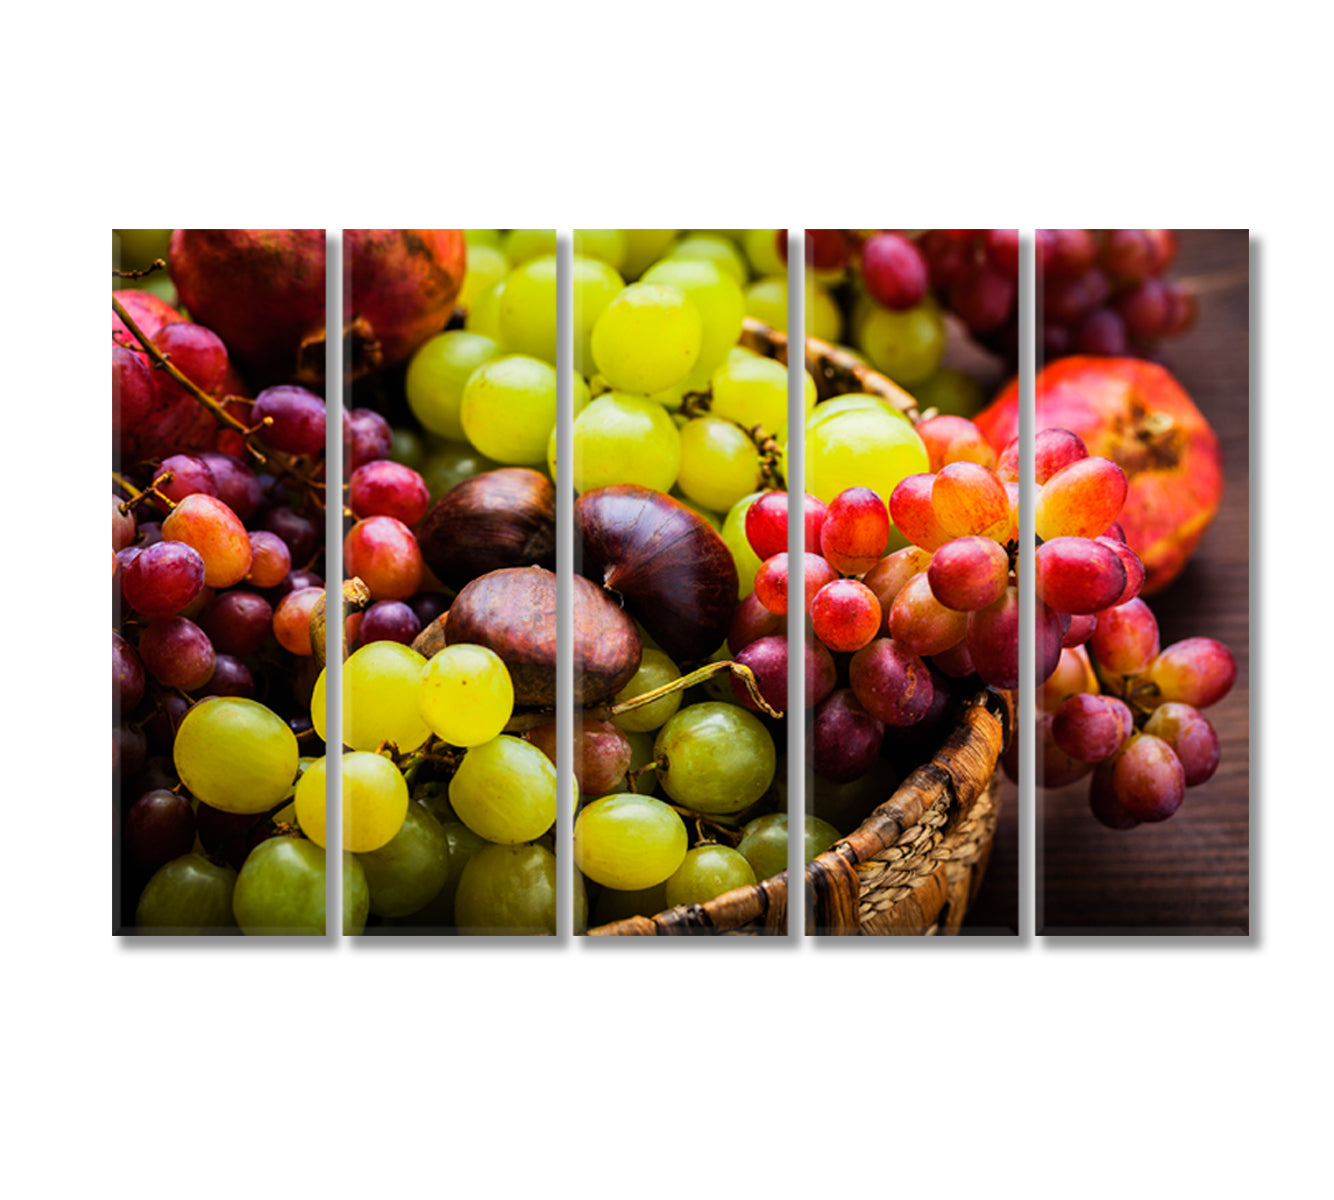 Wicker Basket with Grapes Canvas Print-Canvas Print-CetArt-5 Panels-36x24 inches-CetArt